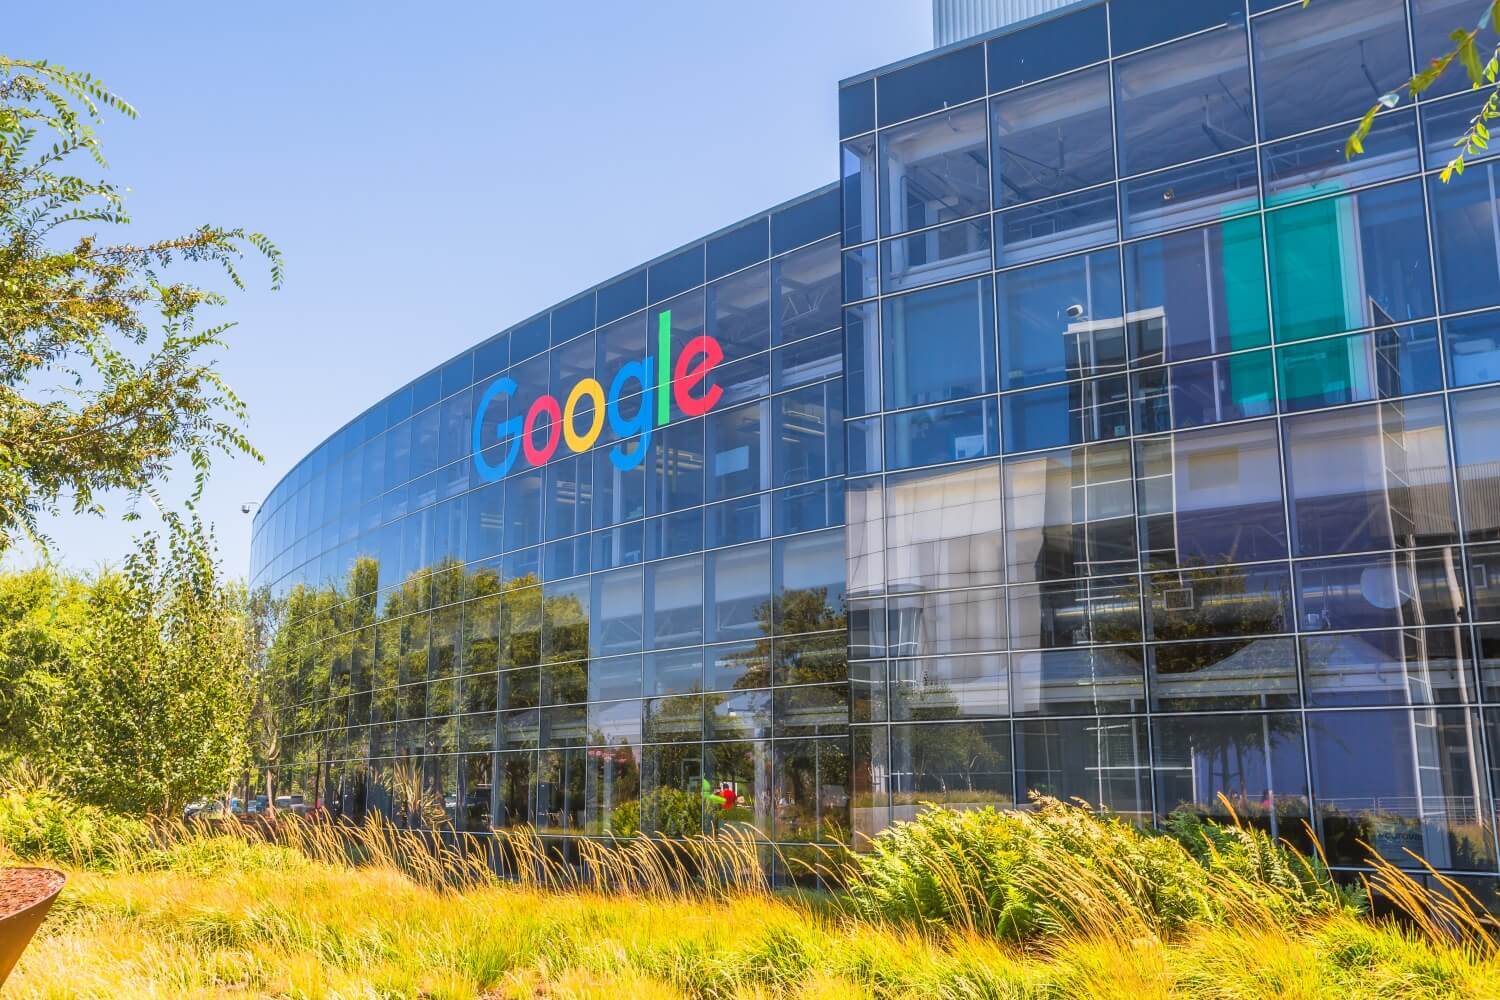 Google employees can now work from home for an additional 12 months